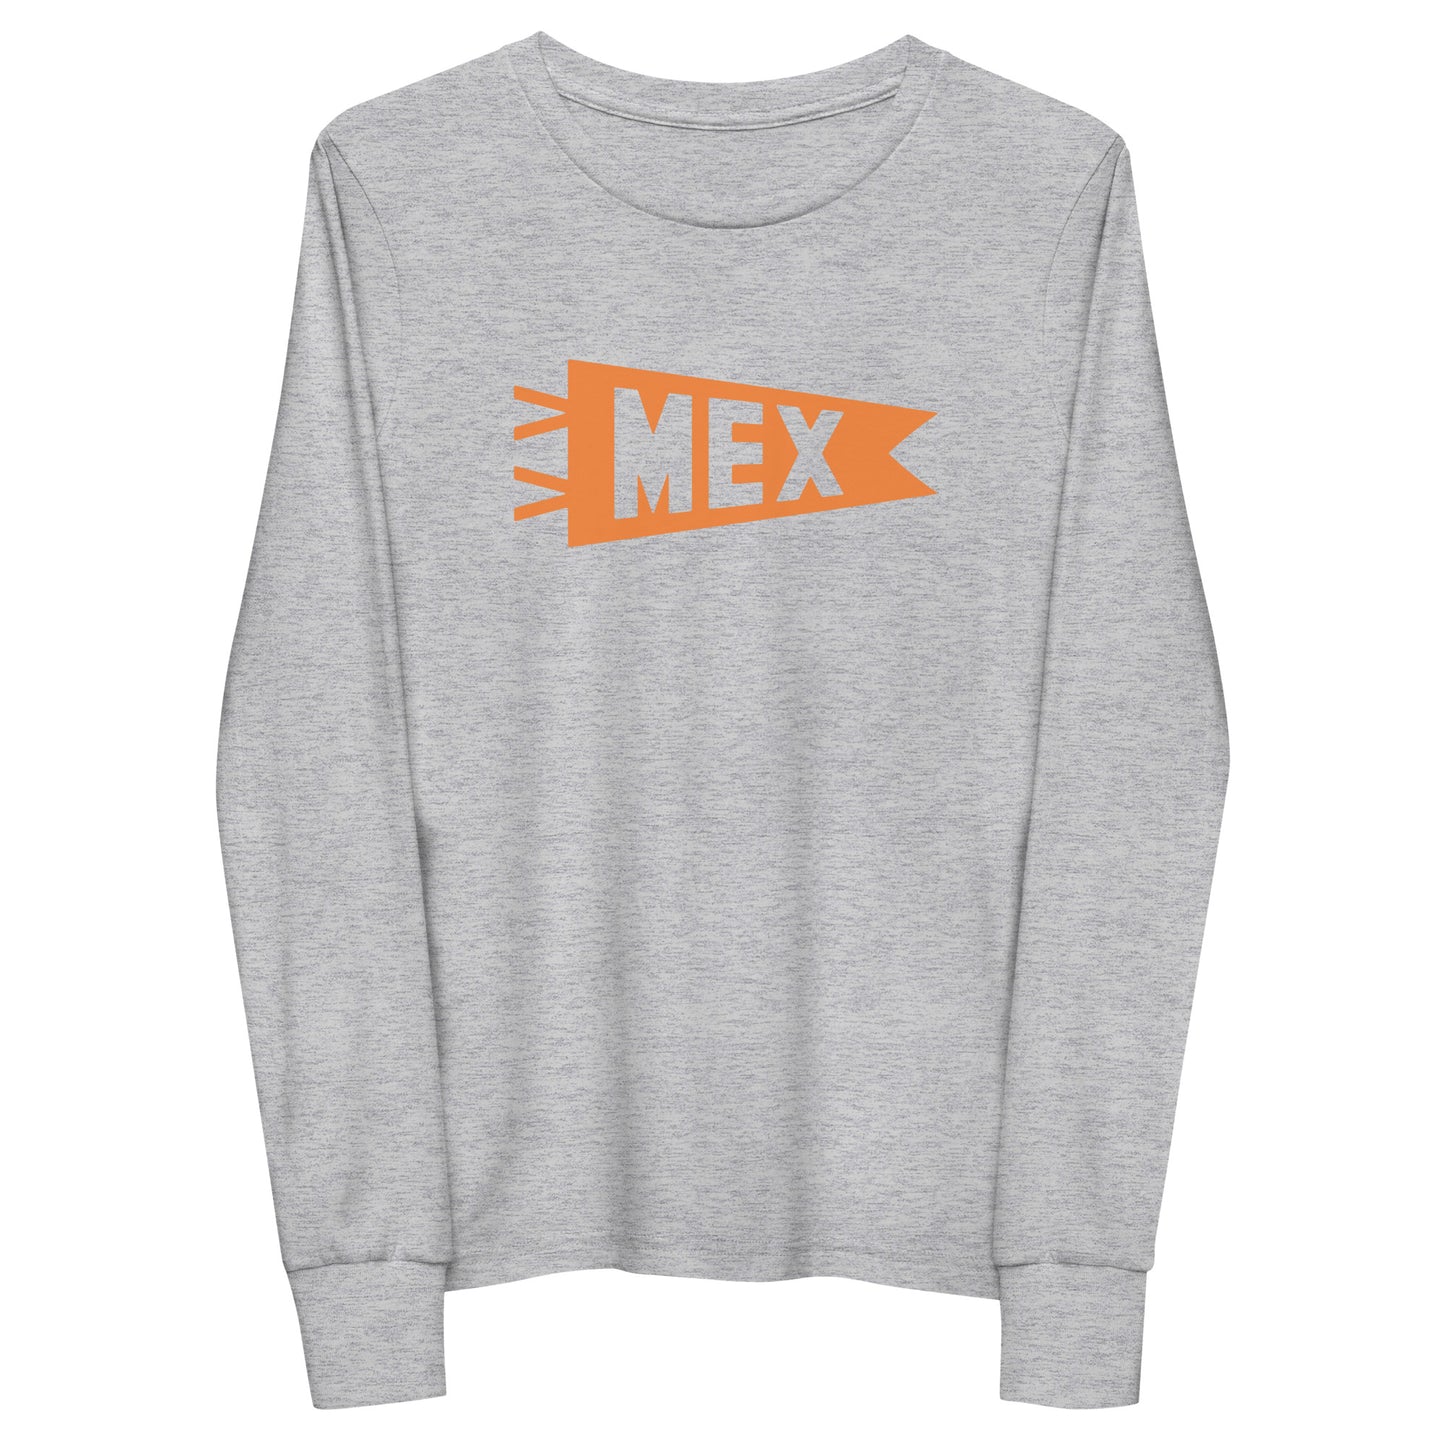 Kid's Airport Code Long-Sleeve Tee - Orange Graphic • MEX Mexico City • YHM Designs - Image 11